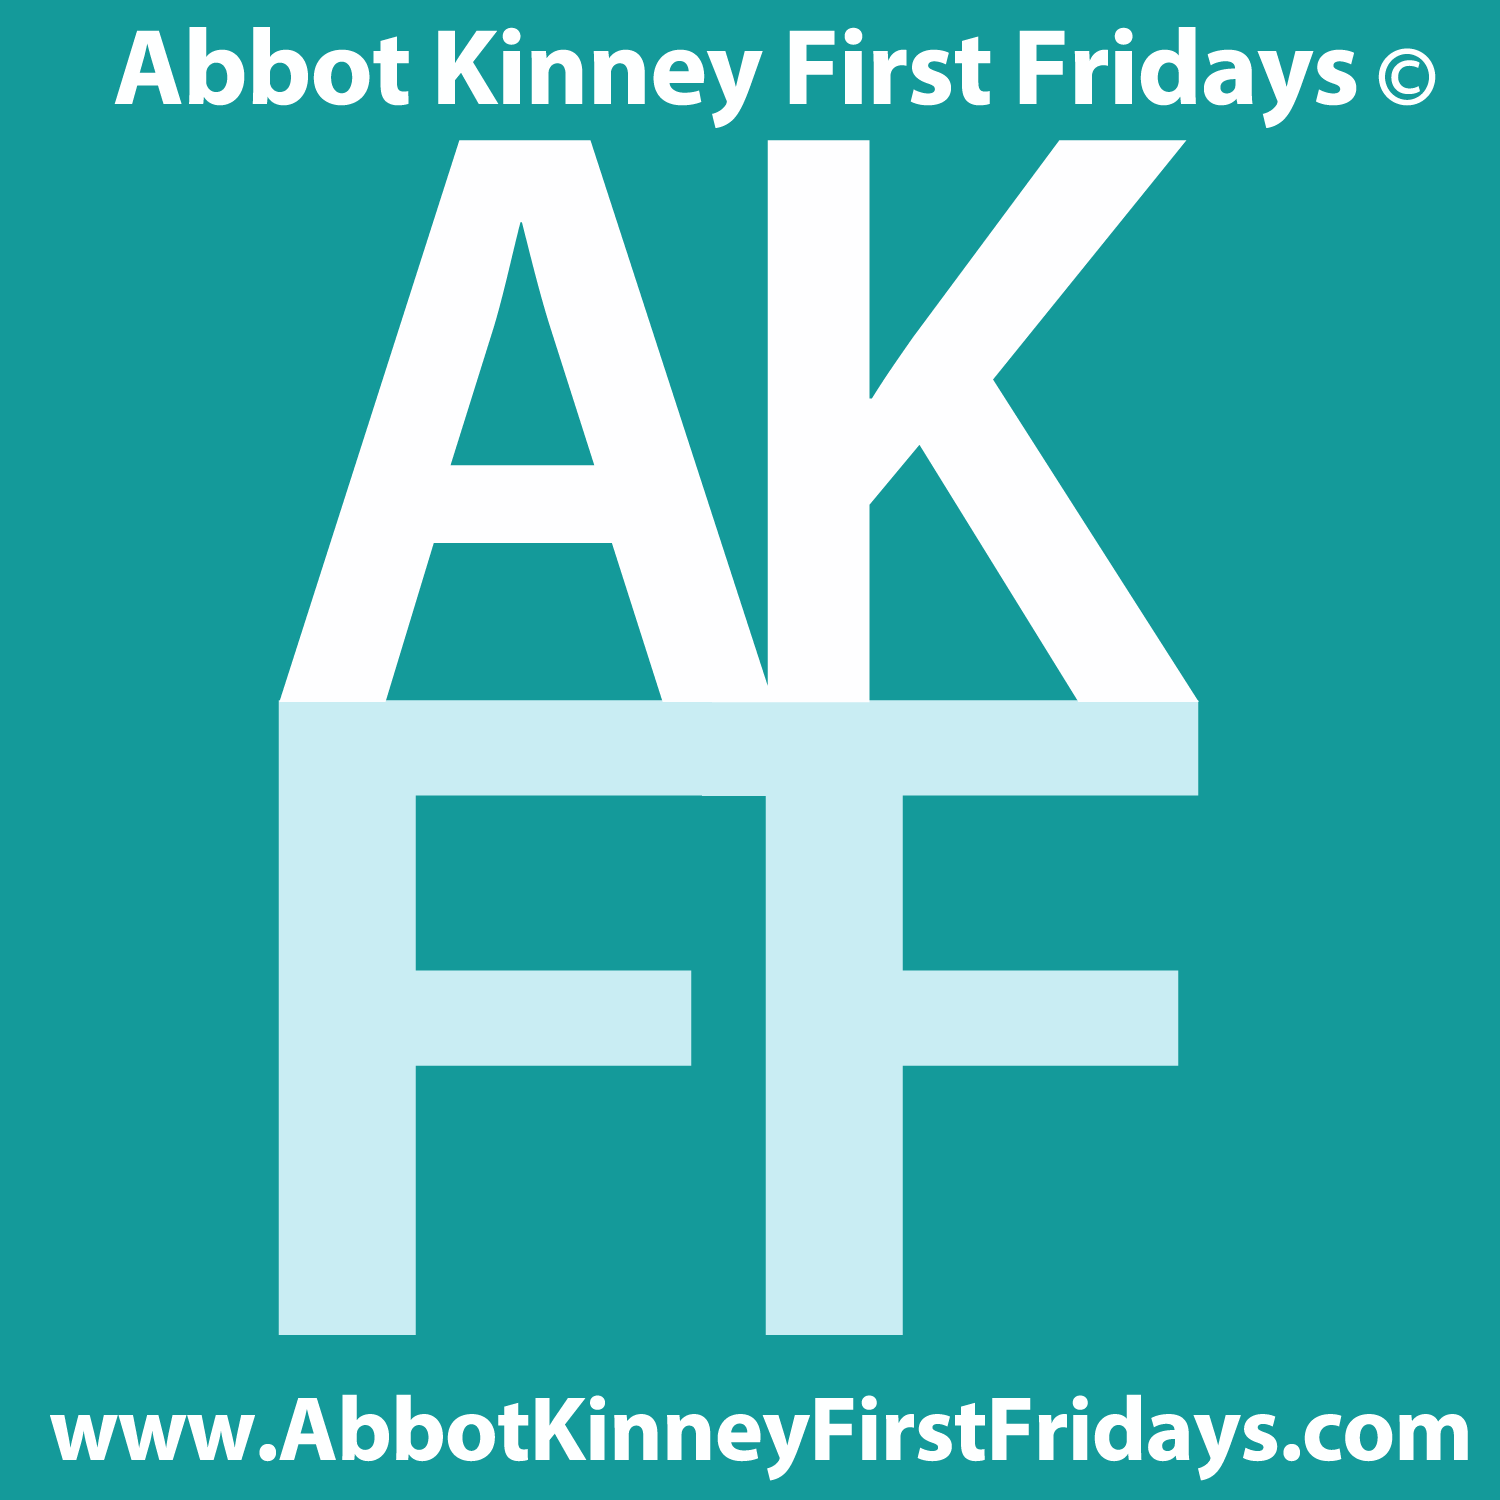 Abbot Kinney First Fridays put First Fridays in Venice on the map! Indy blog covers food, art, culture. Founder of #virtual1stfridays NEW!